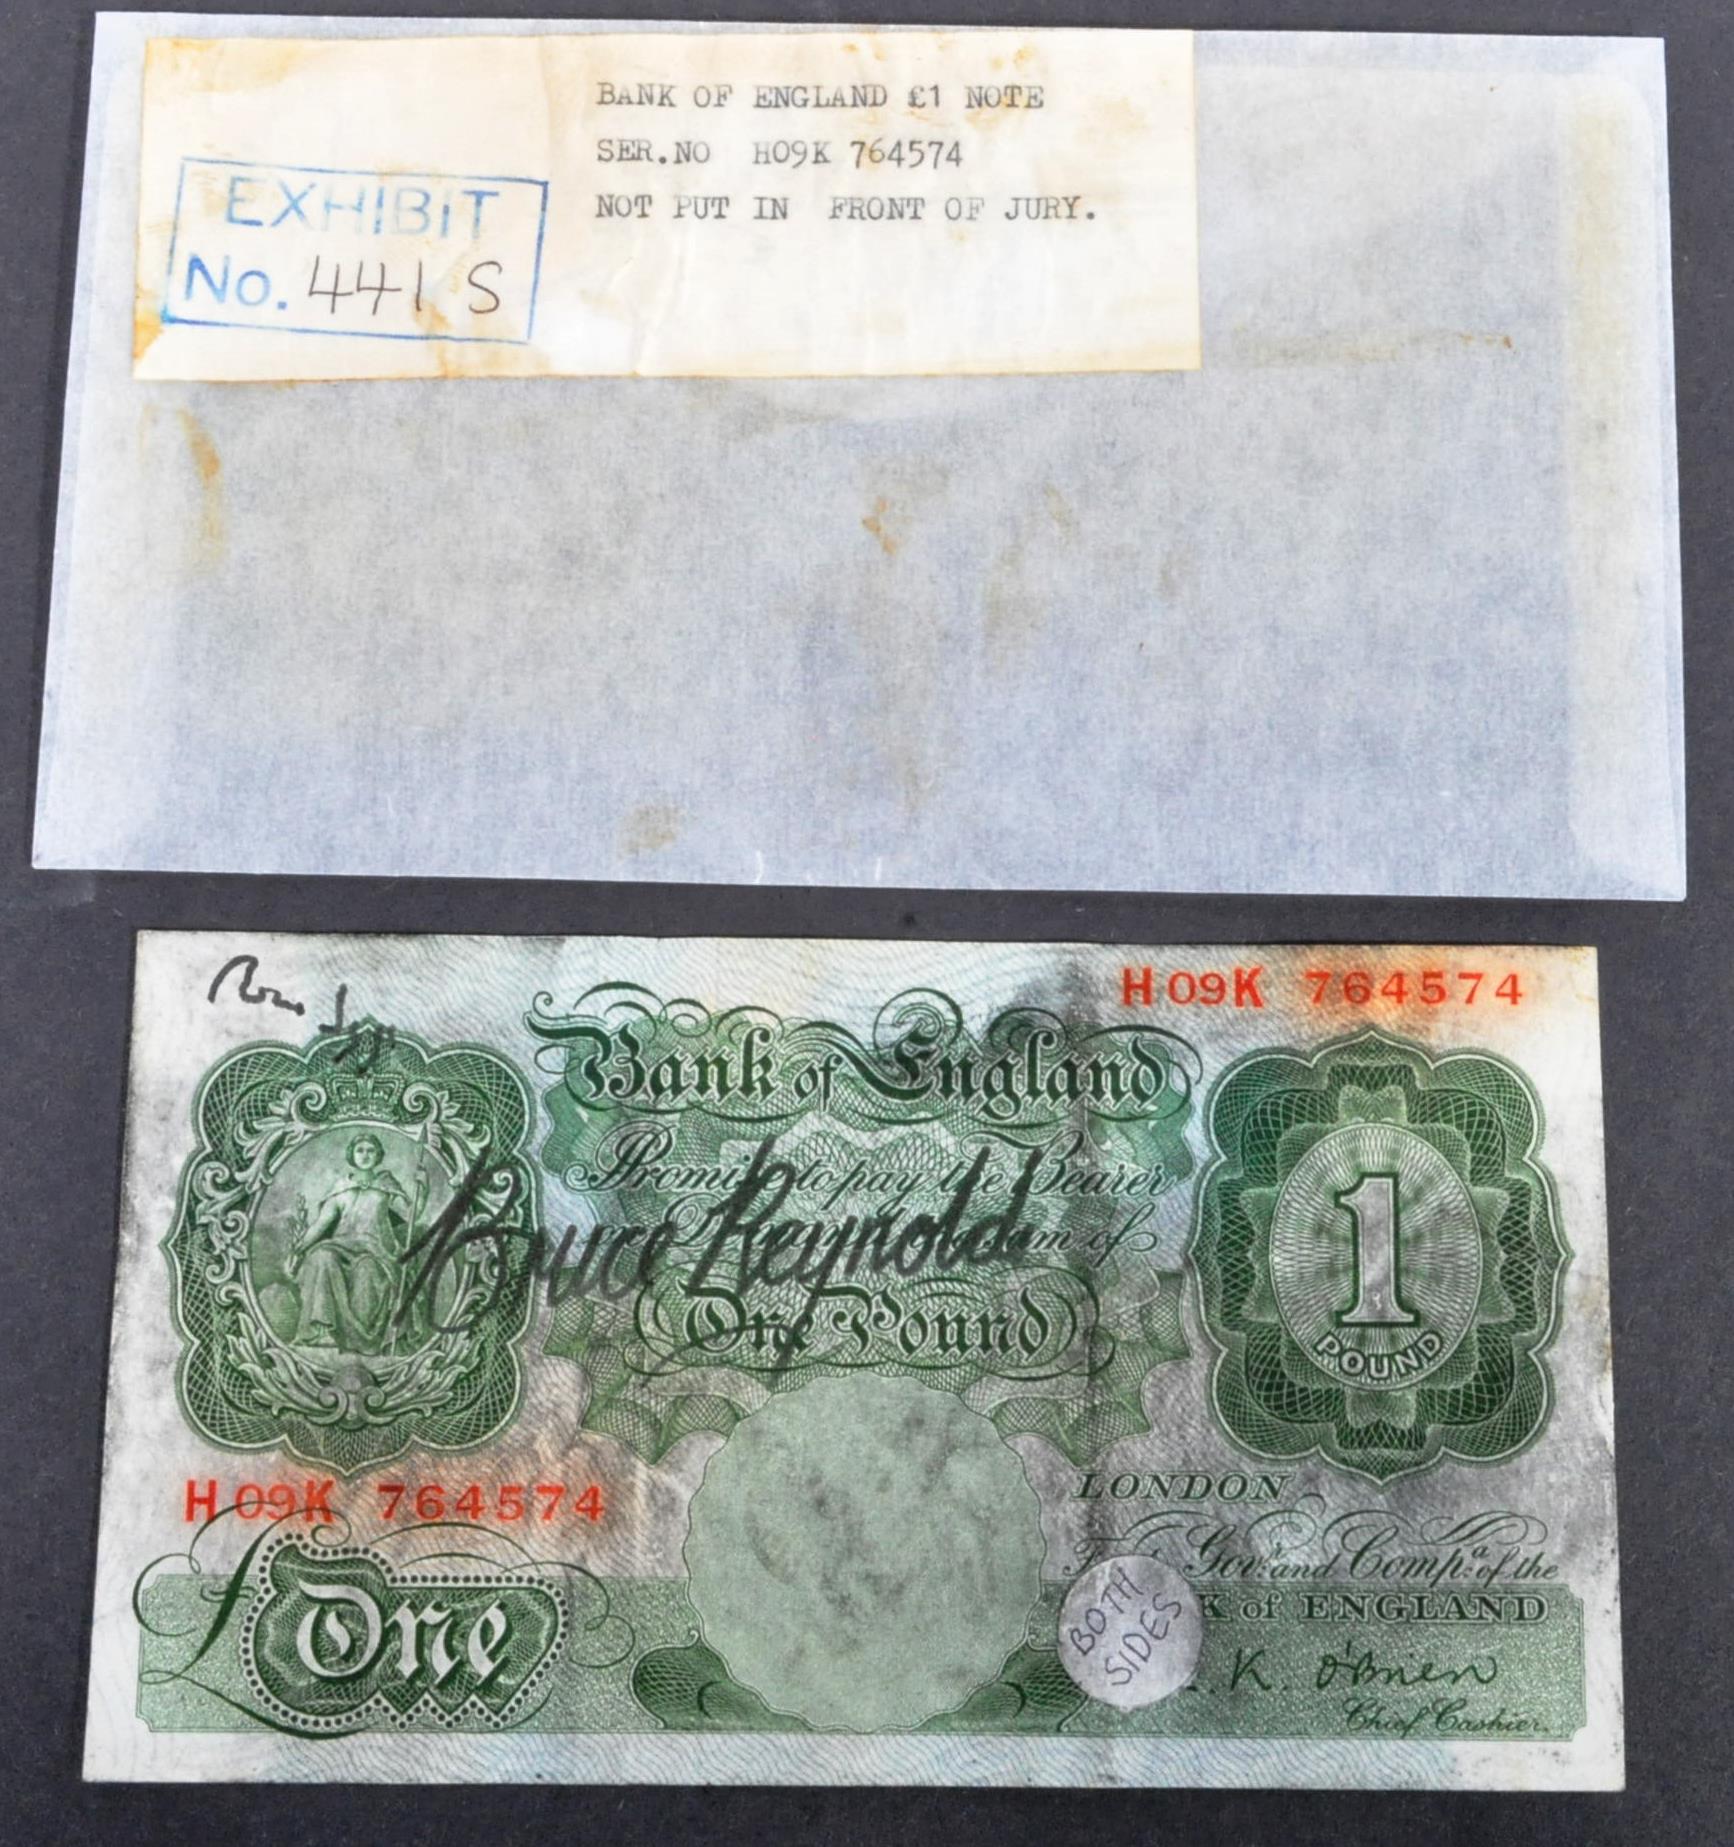 THE GREAT TRAIN ROBBERY - ORIGINAL £1 NOTE FROM THE ROBBERY